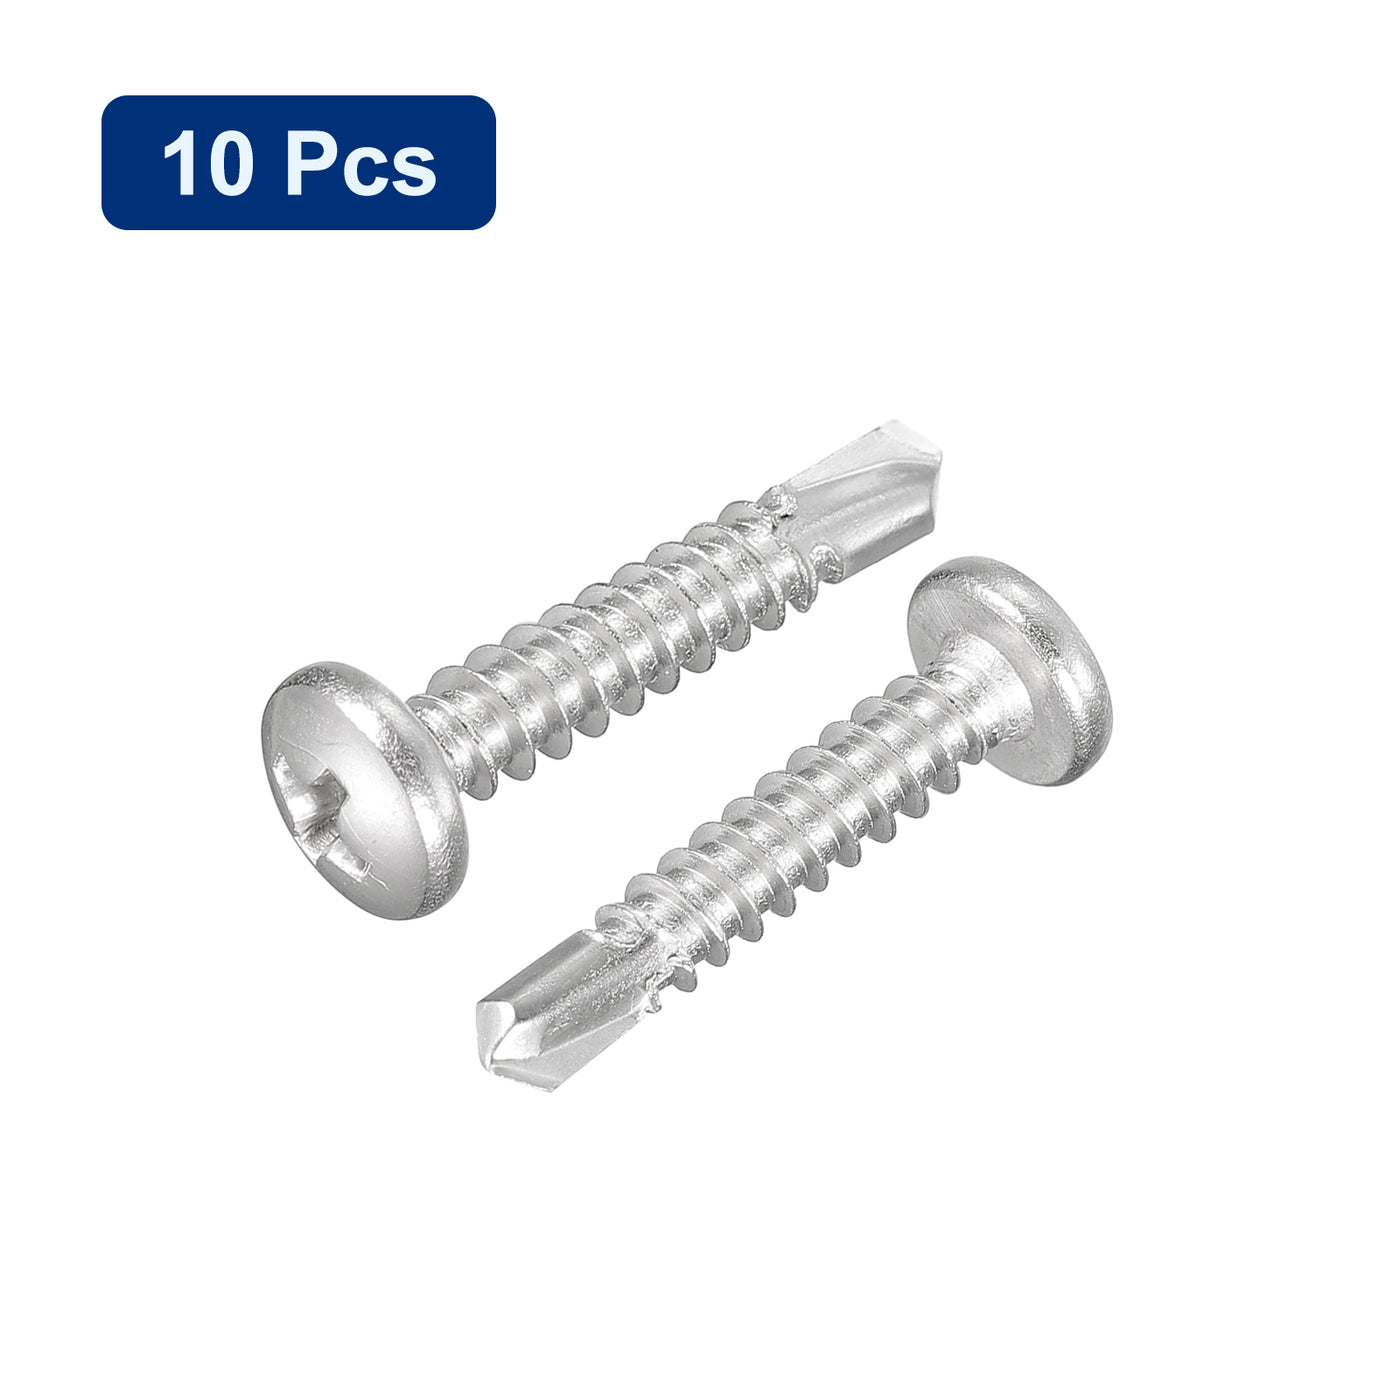 uxcell Uxcell #10 x 1" Self Drilling Screws, 10pcs Phillips Pan Head Self Tapping Screws